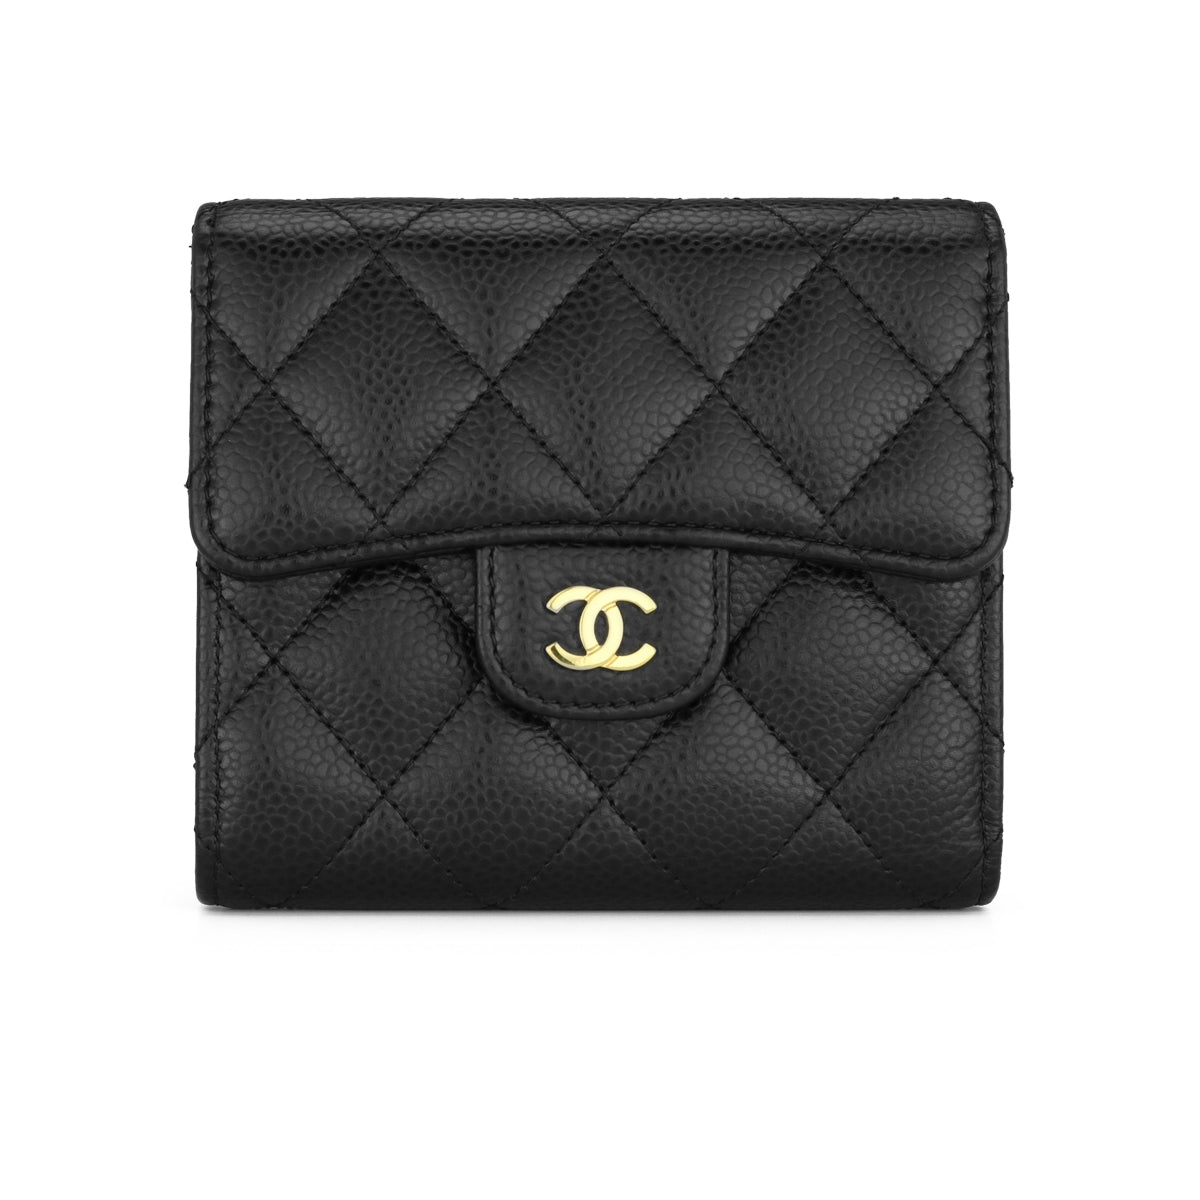 Chanel Classic Flap Wallet Pink Caviar Gold Hardware 21S – Coco Approved  Studio